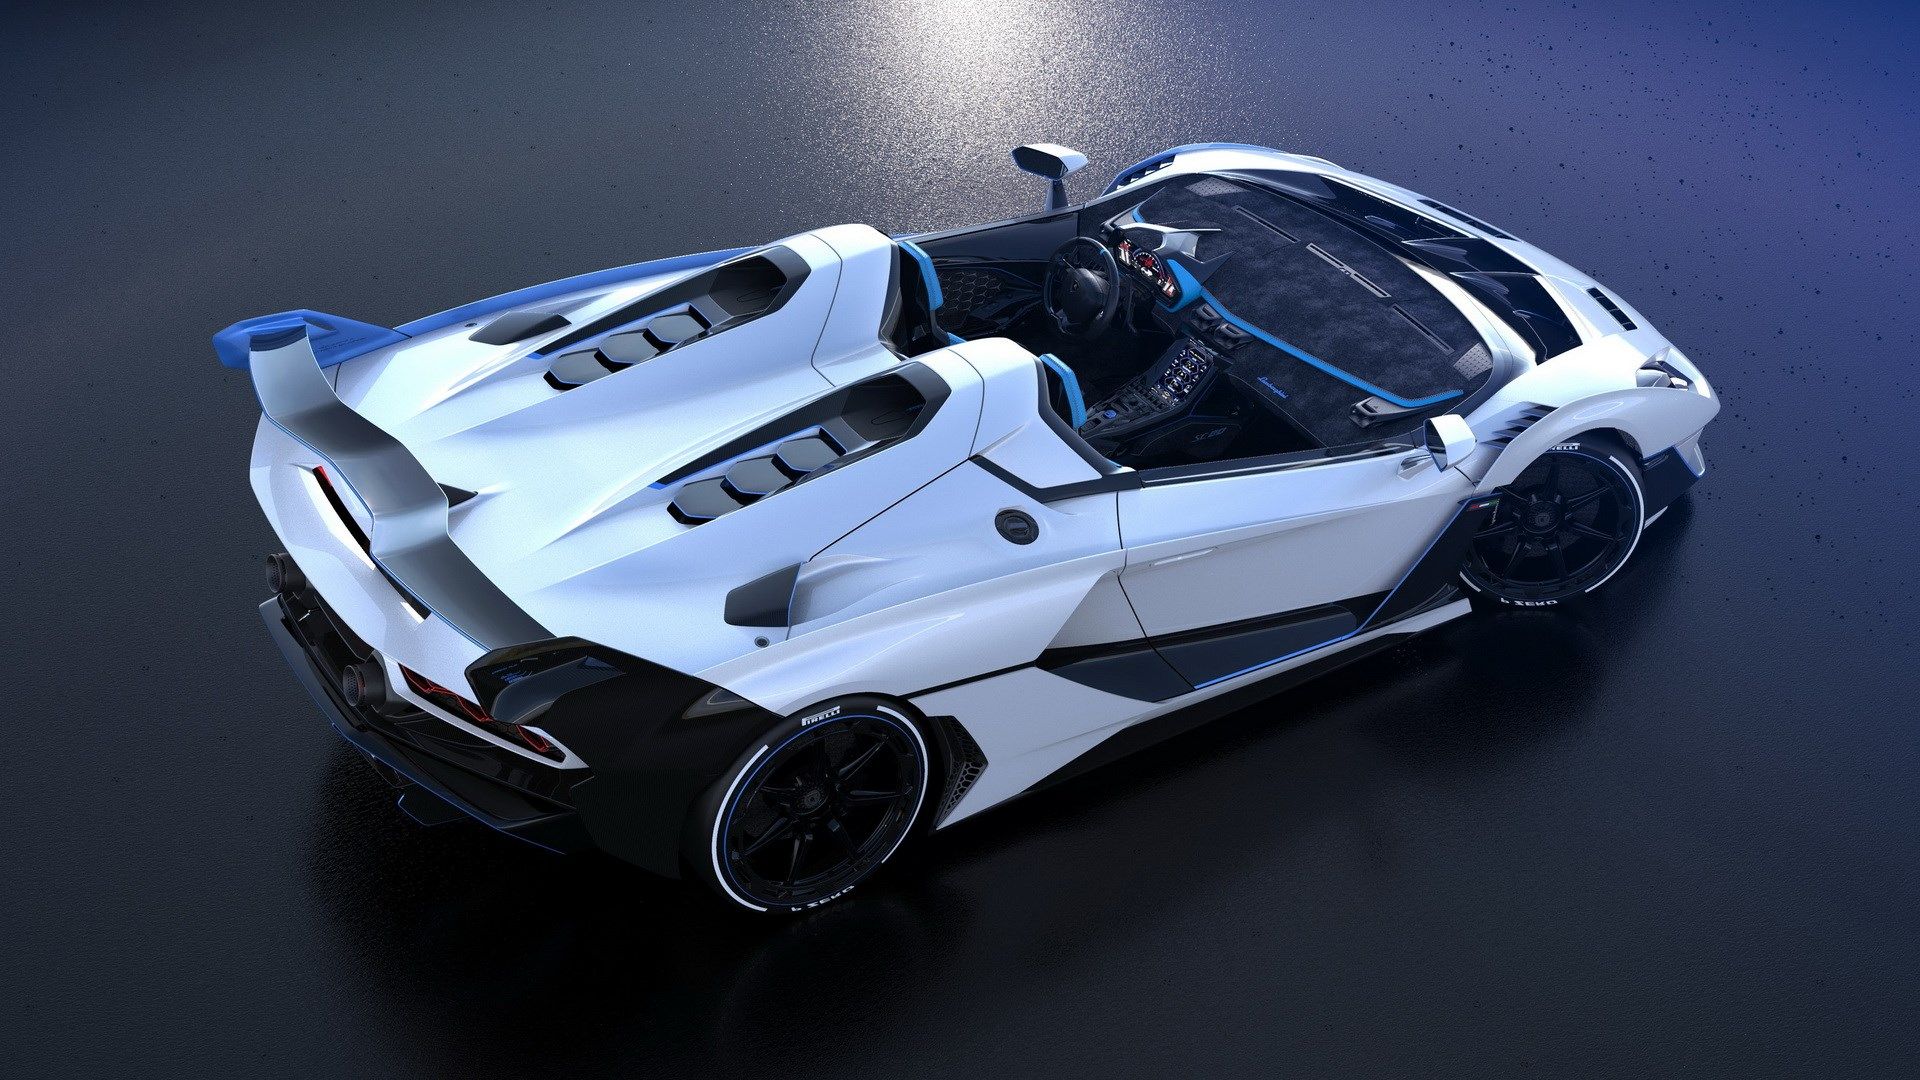 Lamborghini's new SC20 is a wild speedster money can't buy